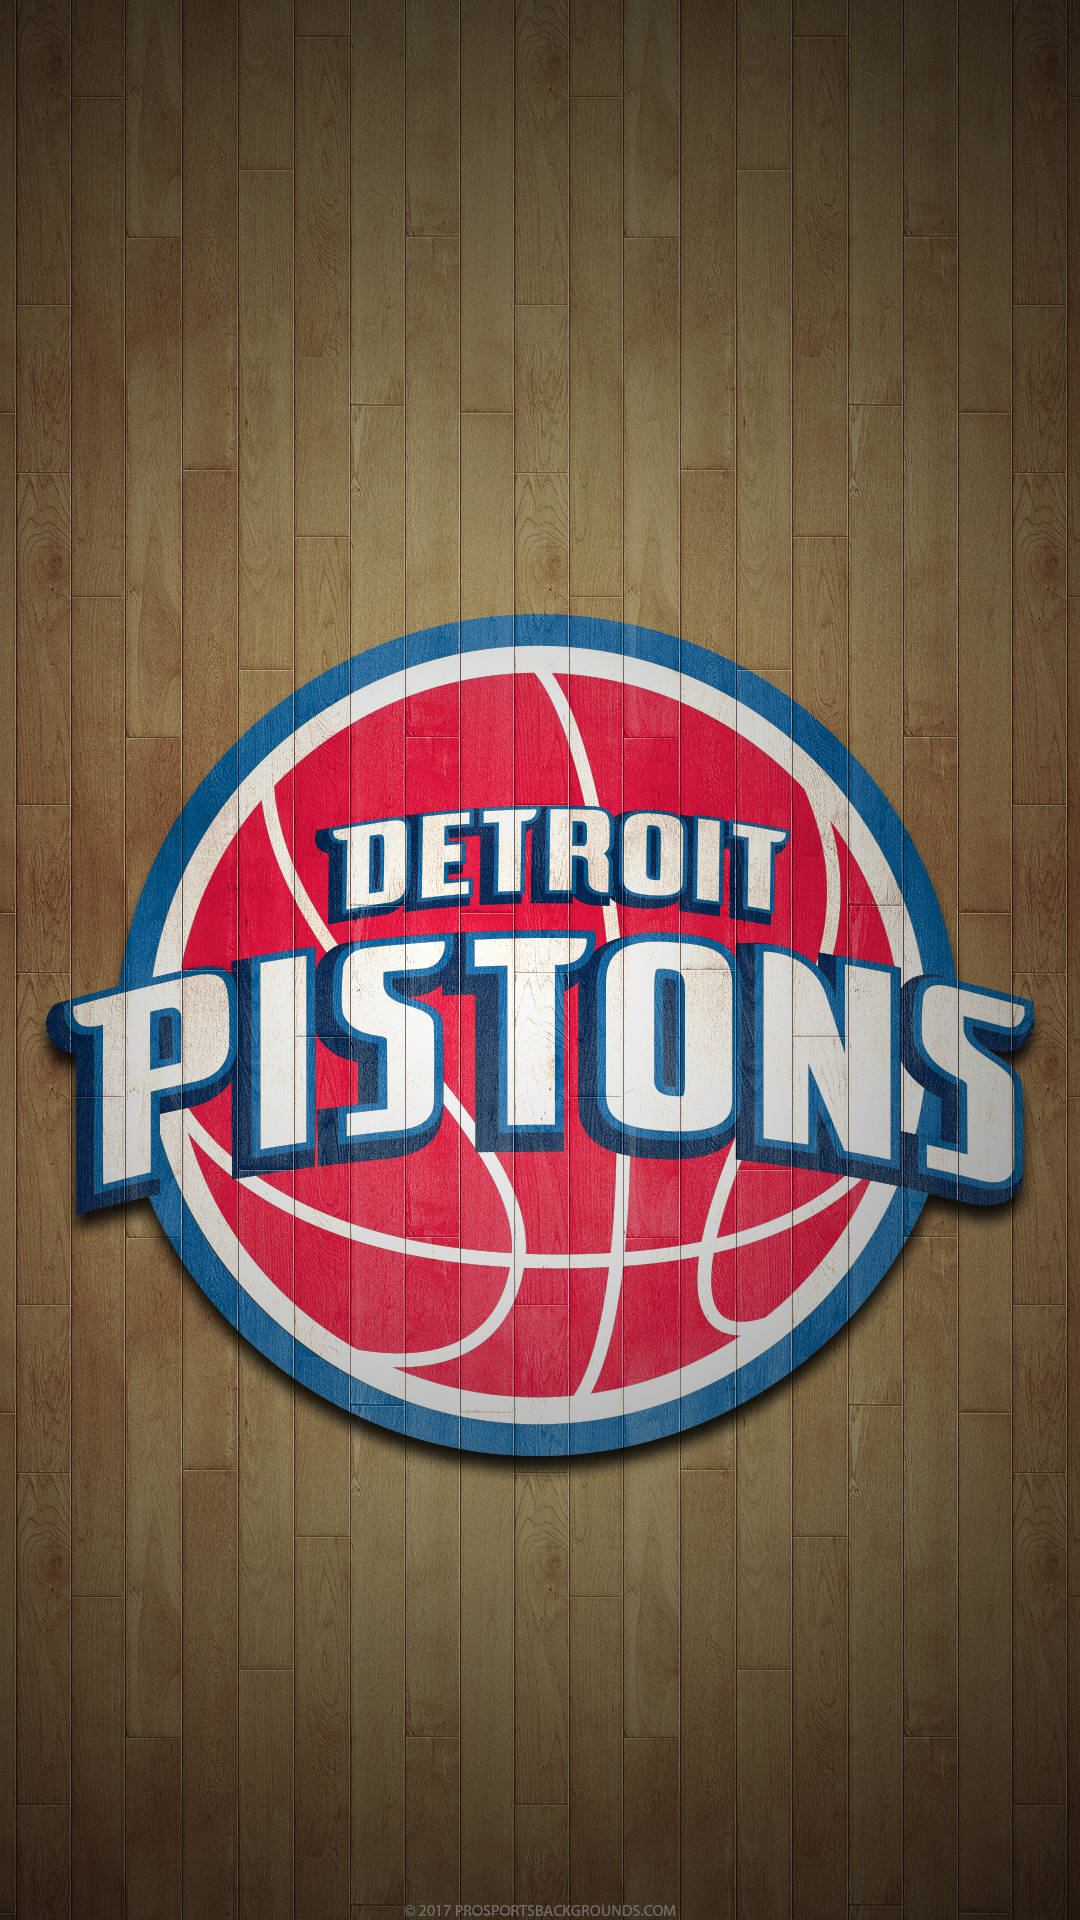 Detroit Pistons Logo Proudly Displayed On The Court Background